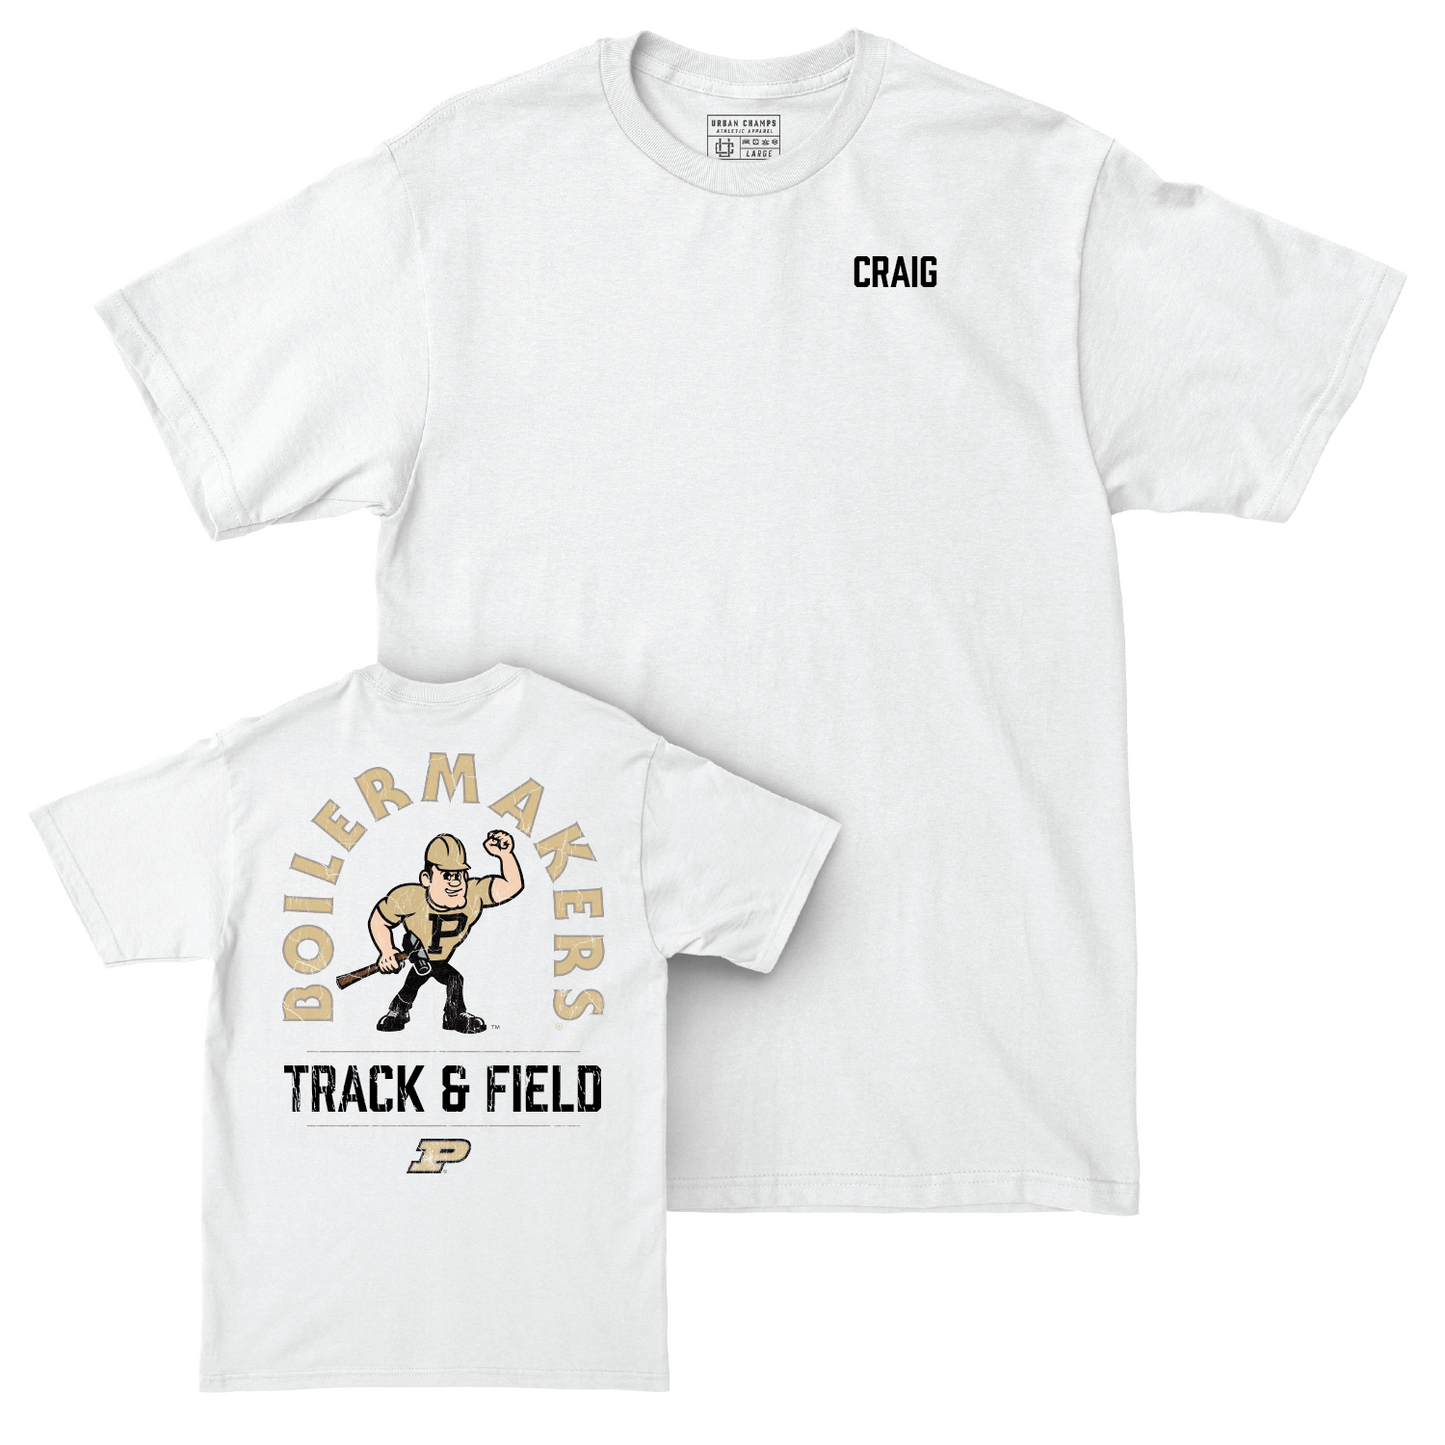 Track & Field White Mascot Comfort Colors Tee - Bryanna Craig Youth Small